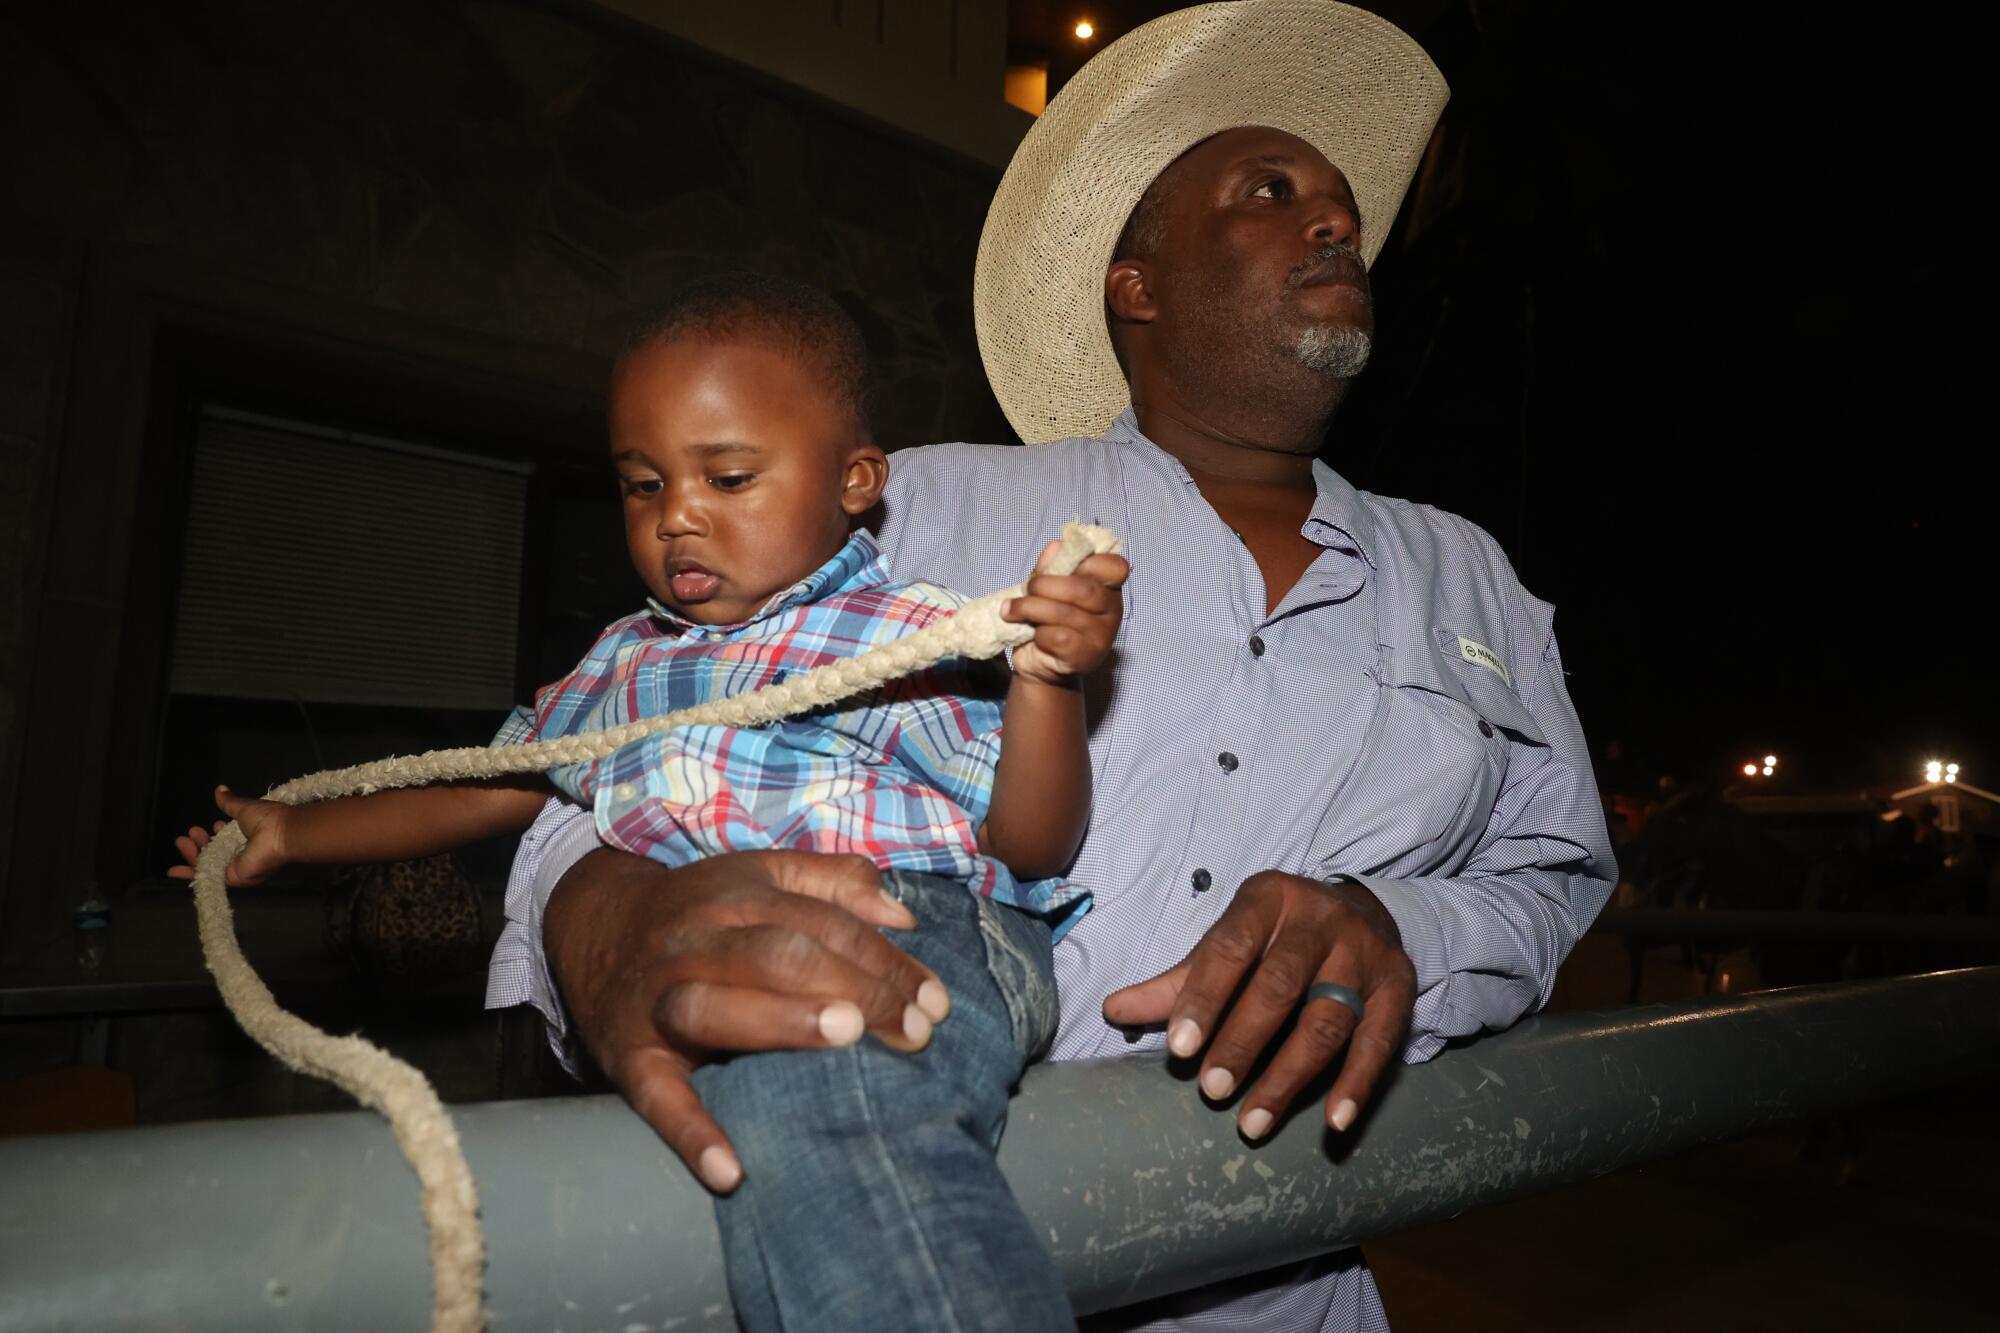 A young boy plays with a rope as he is being held by a man in a cowboy hat.